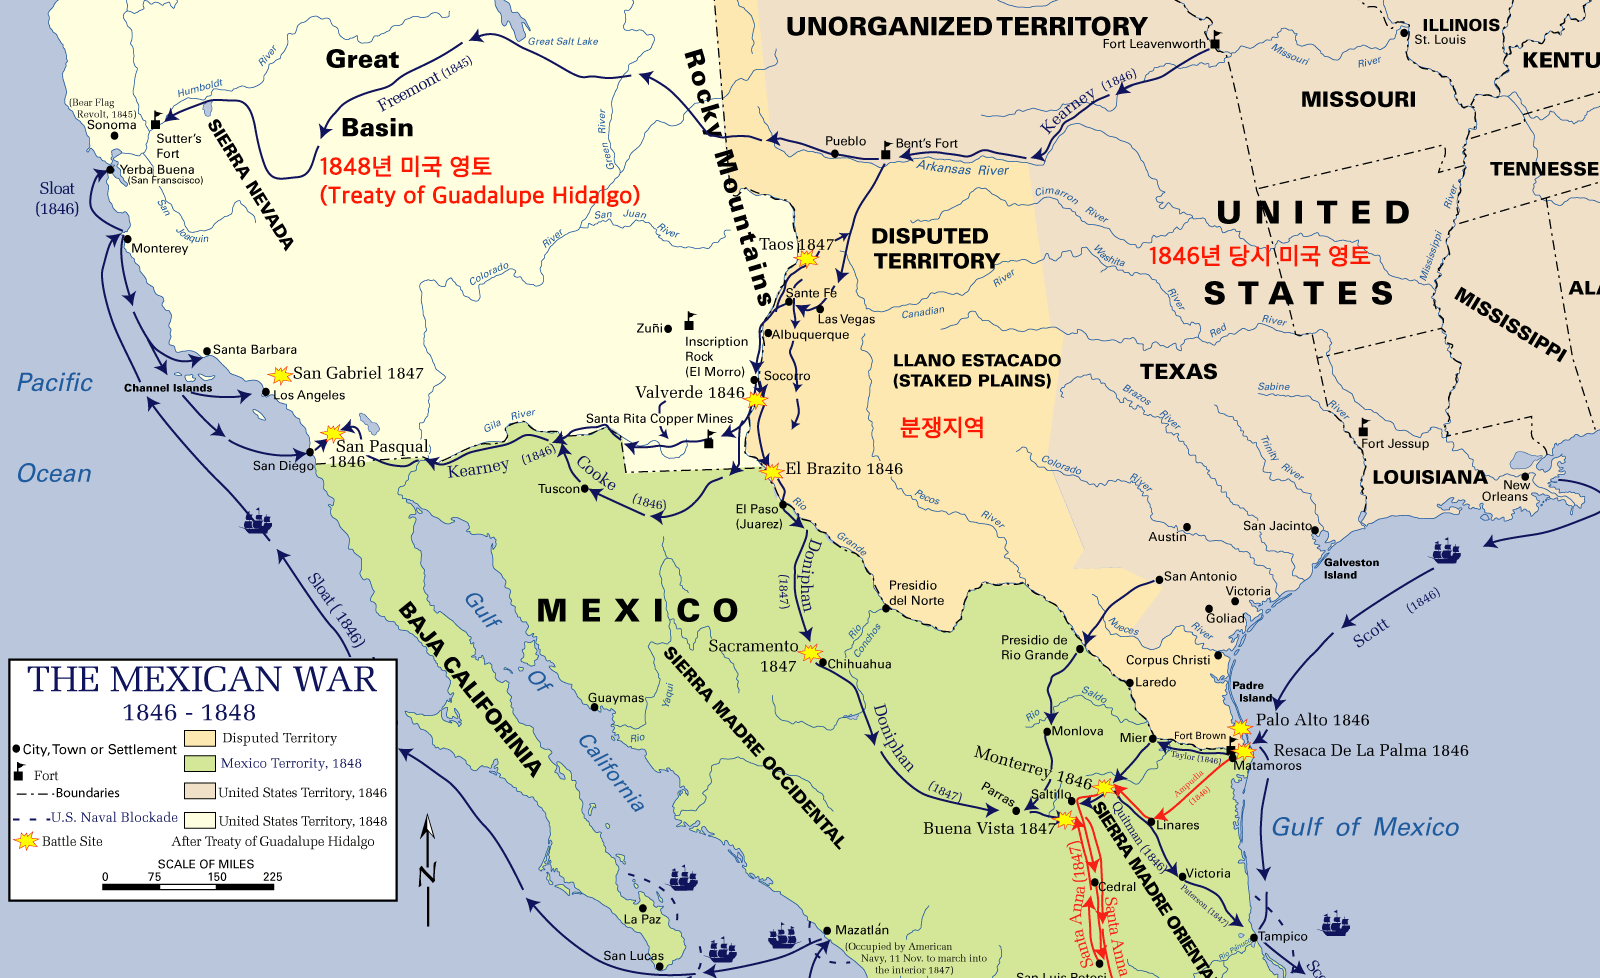 Mexican_war_overview_publicdomain_image.png